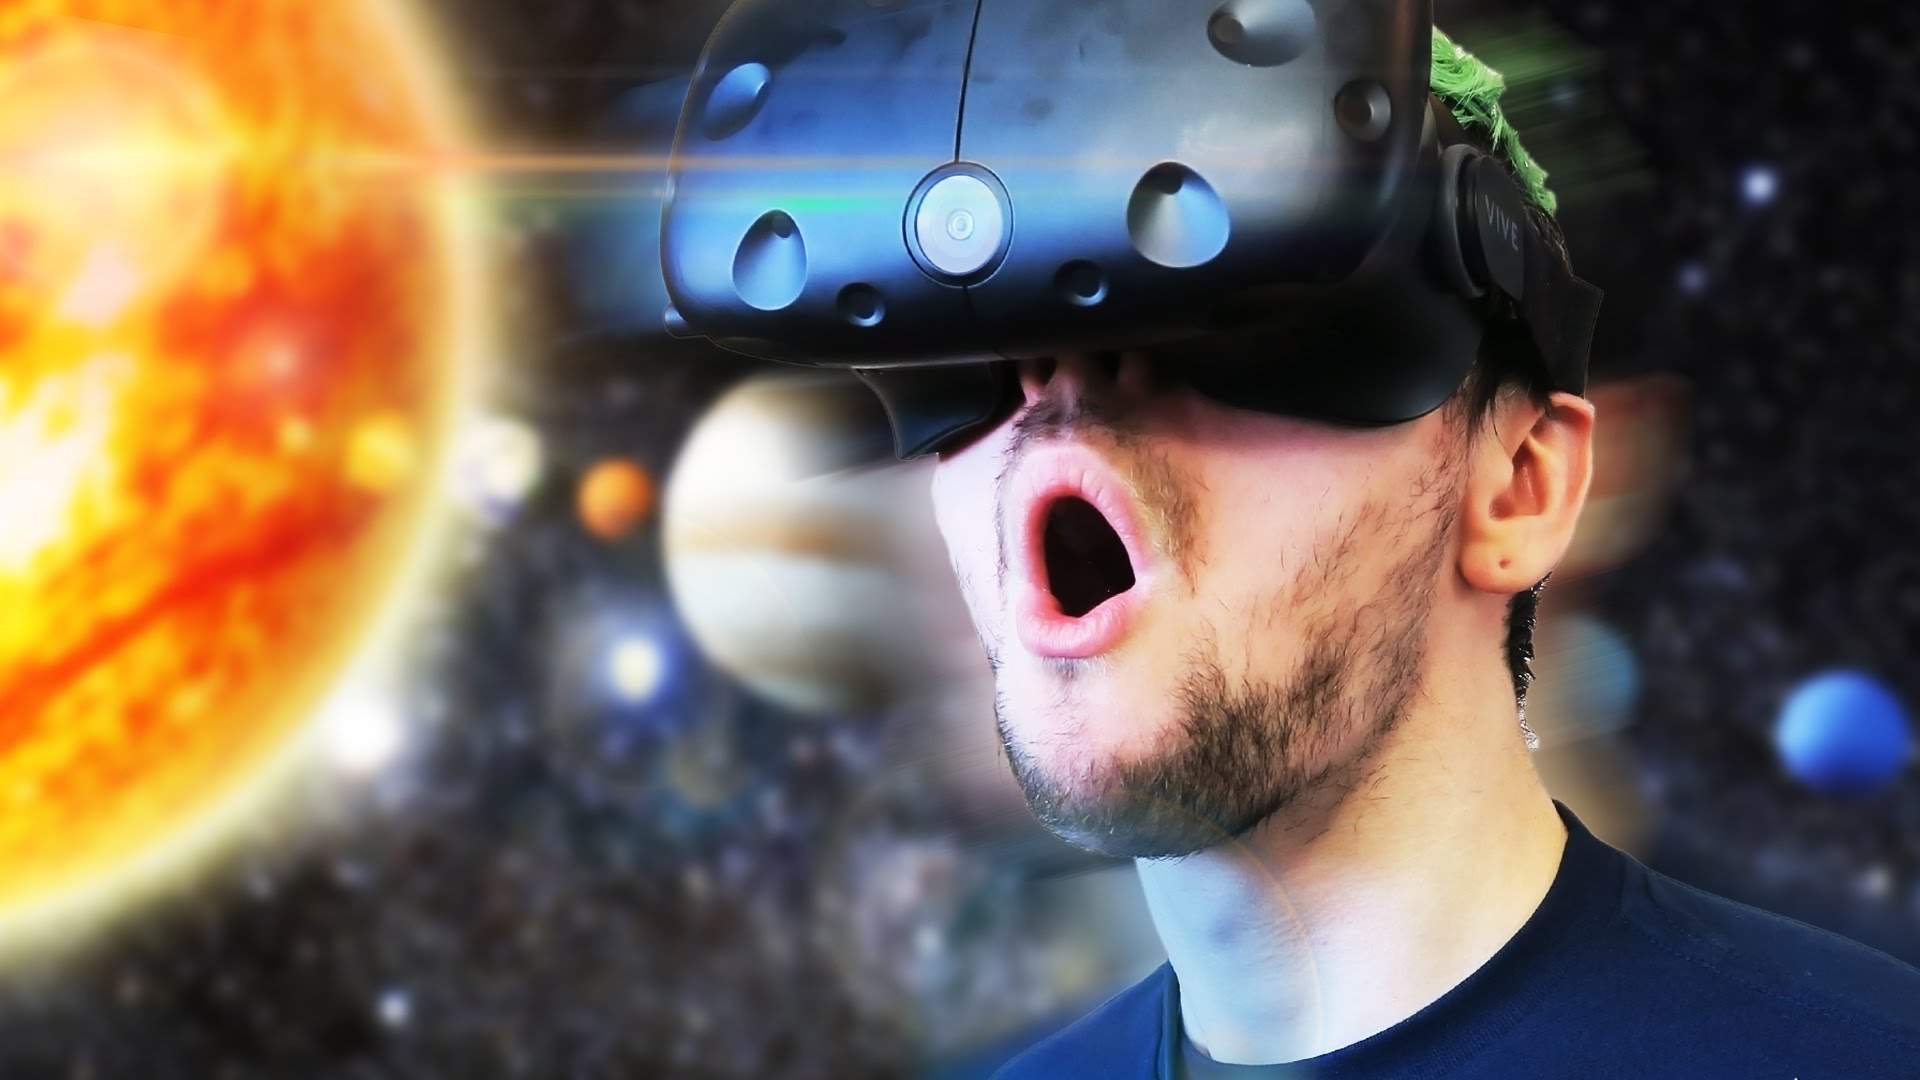 Amazed by VR